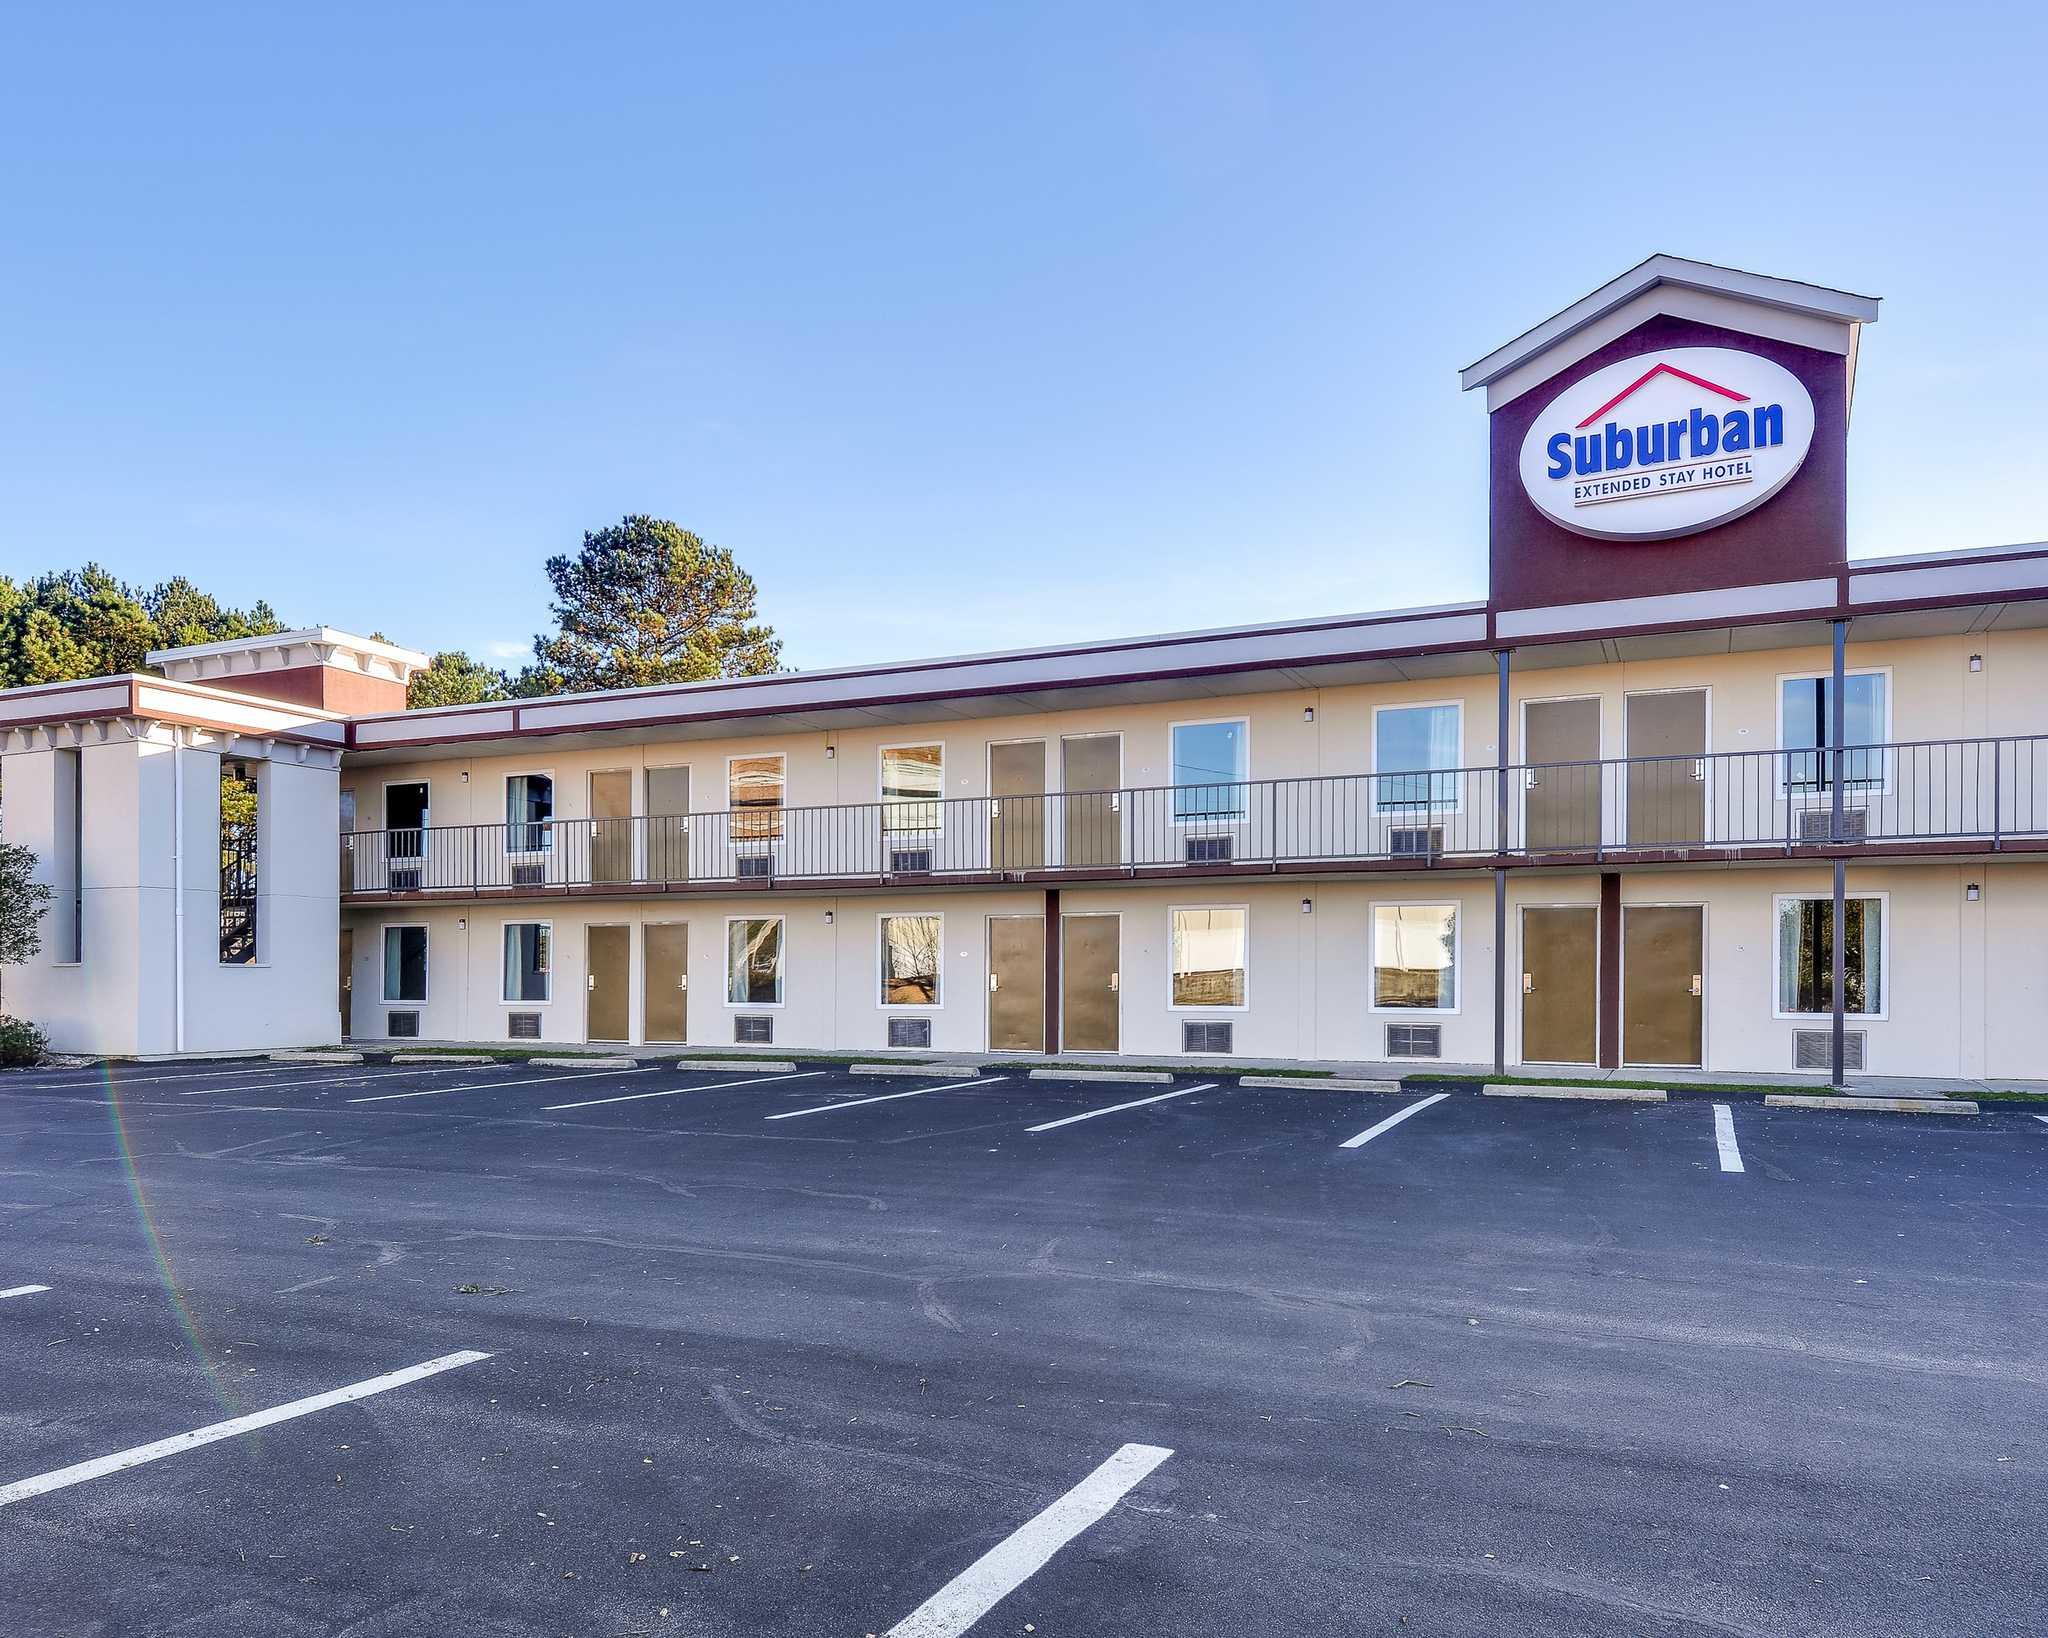 Suburban Extended Stay Hotel Selma I-95 Coupons near me in Selma, NC 27576 | 8coupons